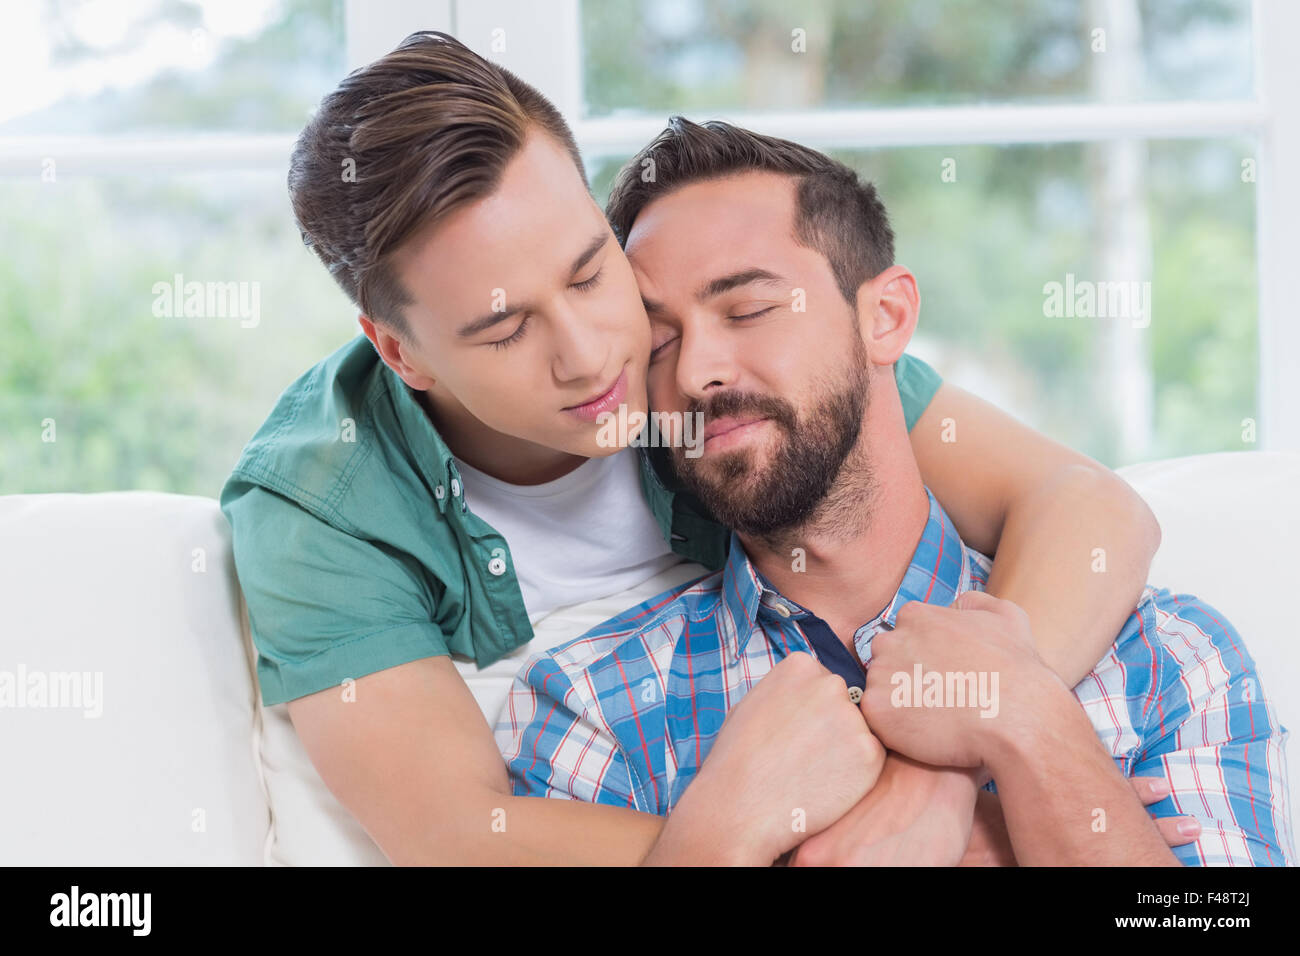 Homosexual couple men hugging each other Stock Photo